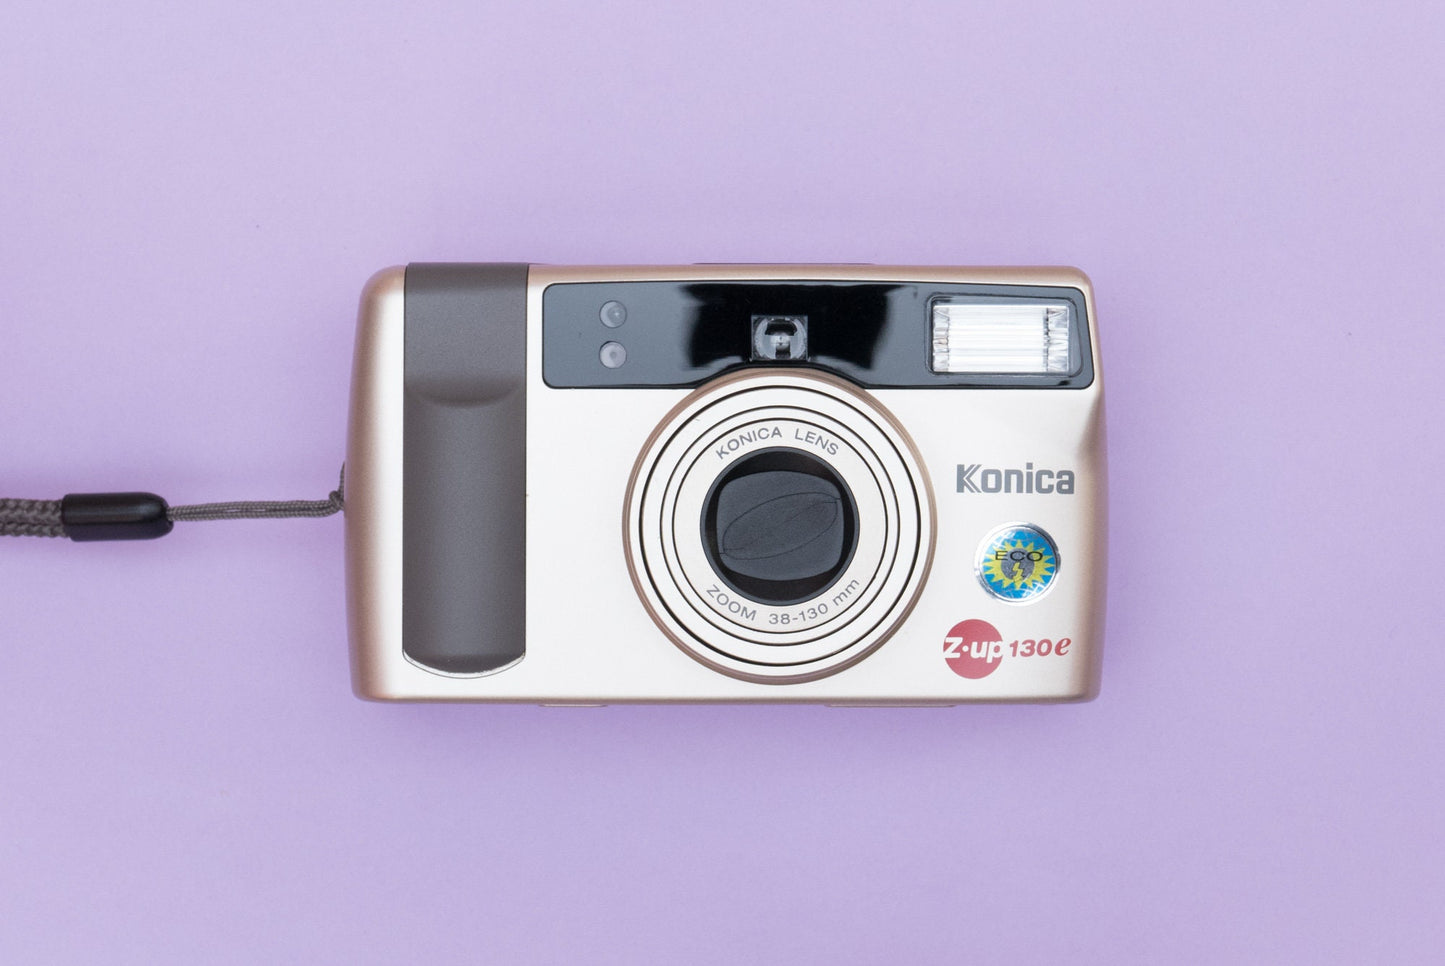 Konica Z-up 130e Compact 35mm Point and Shoot Film Camera